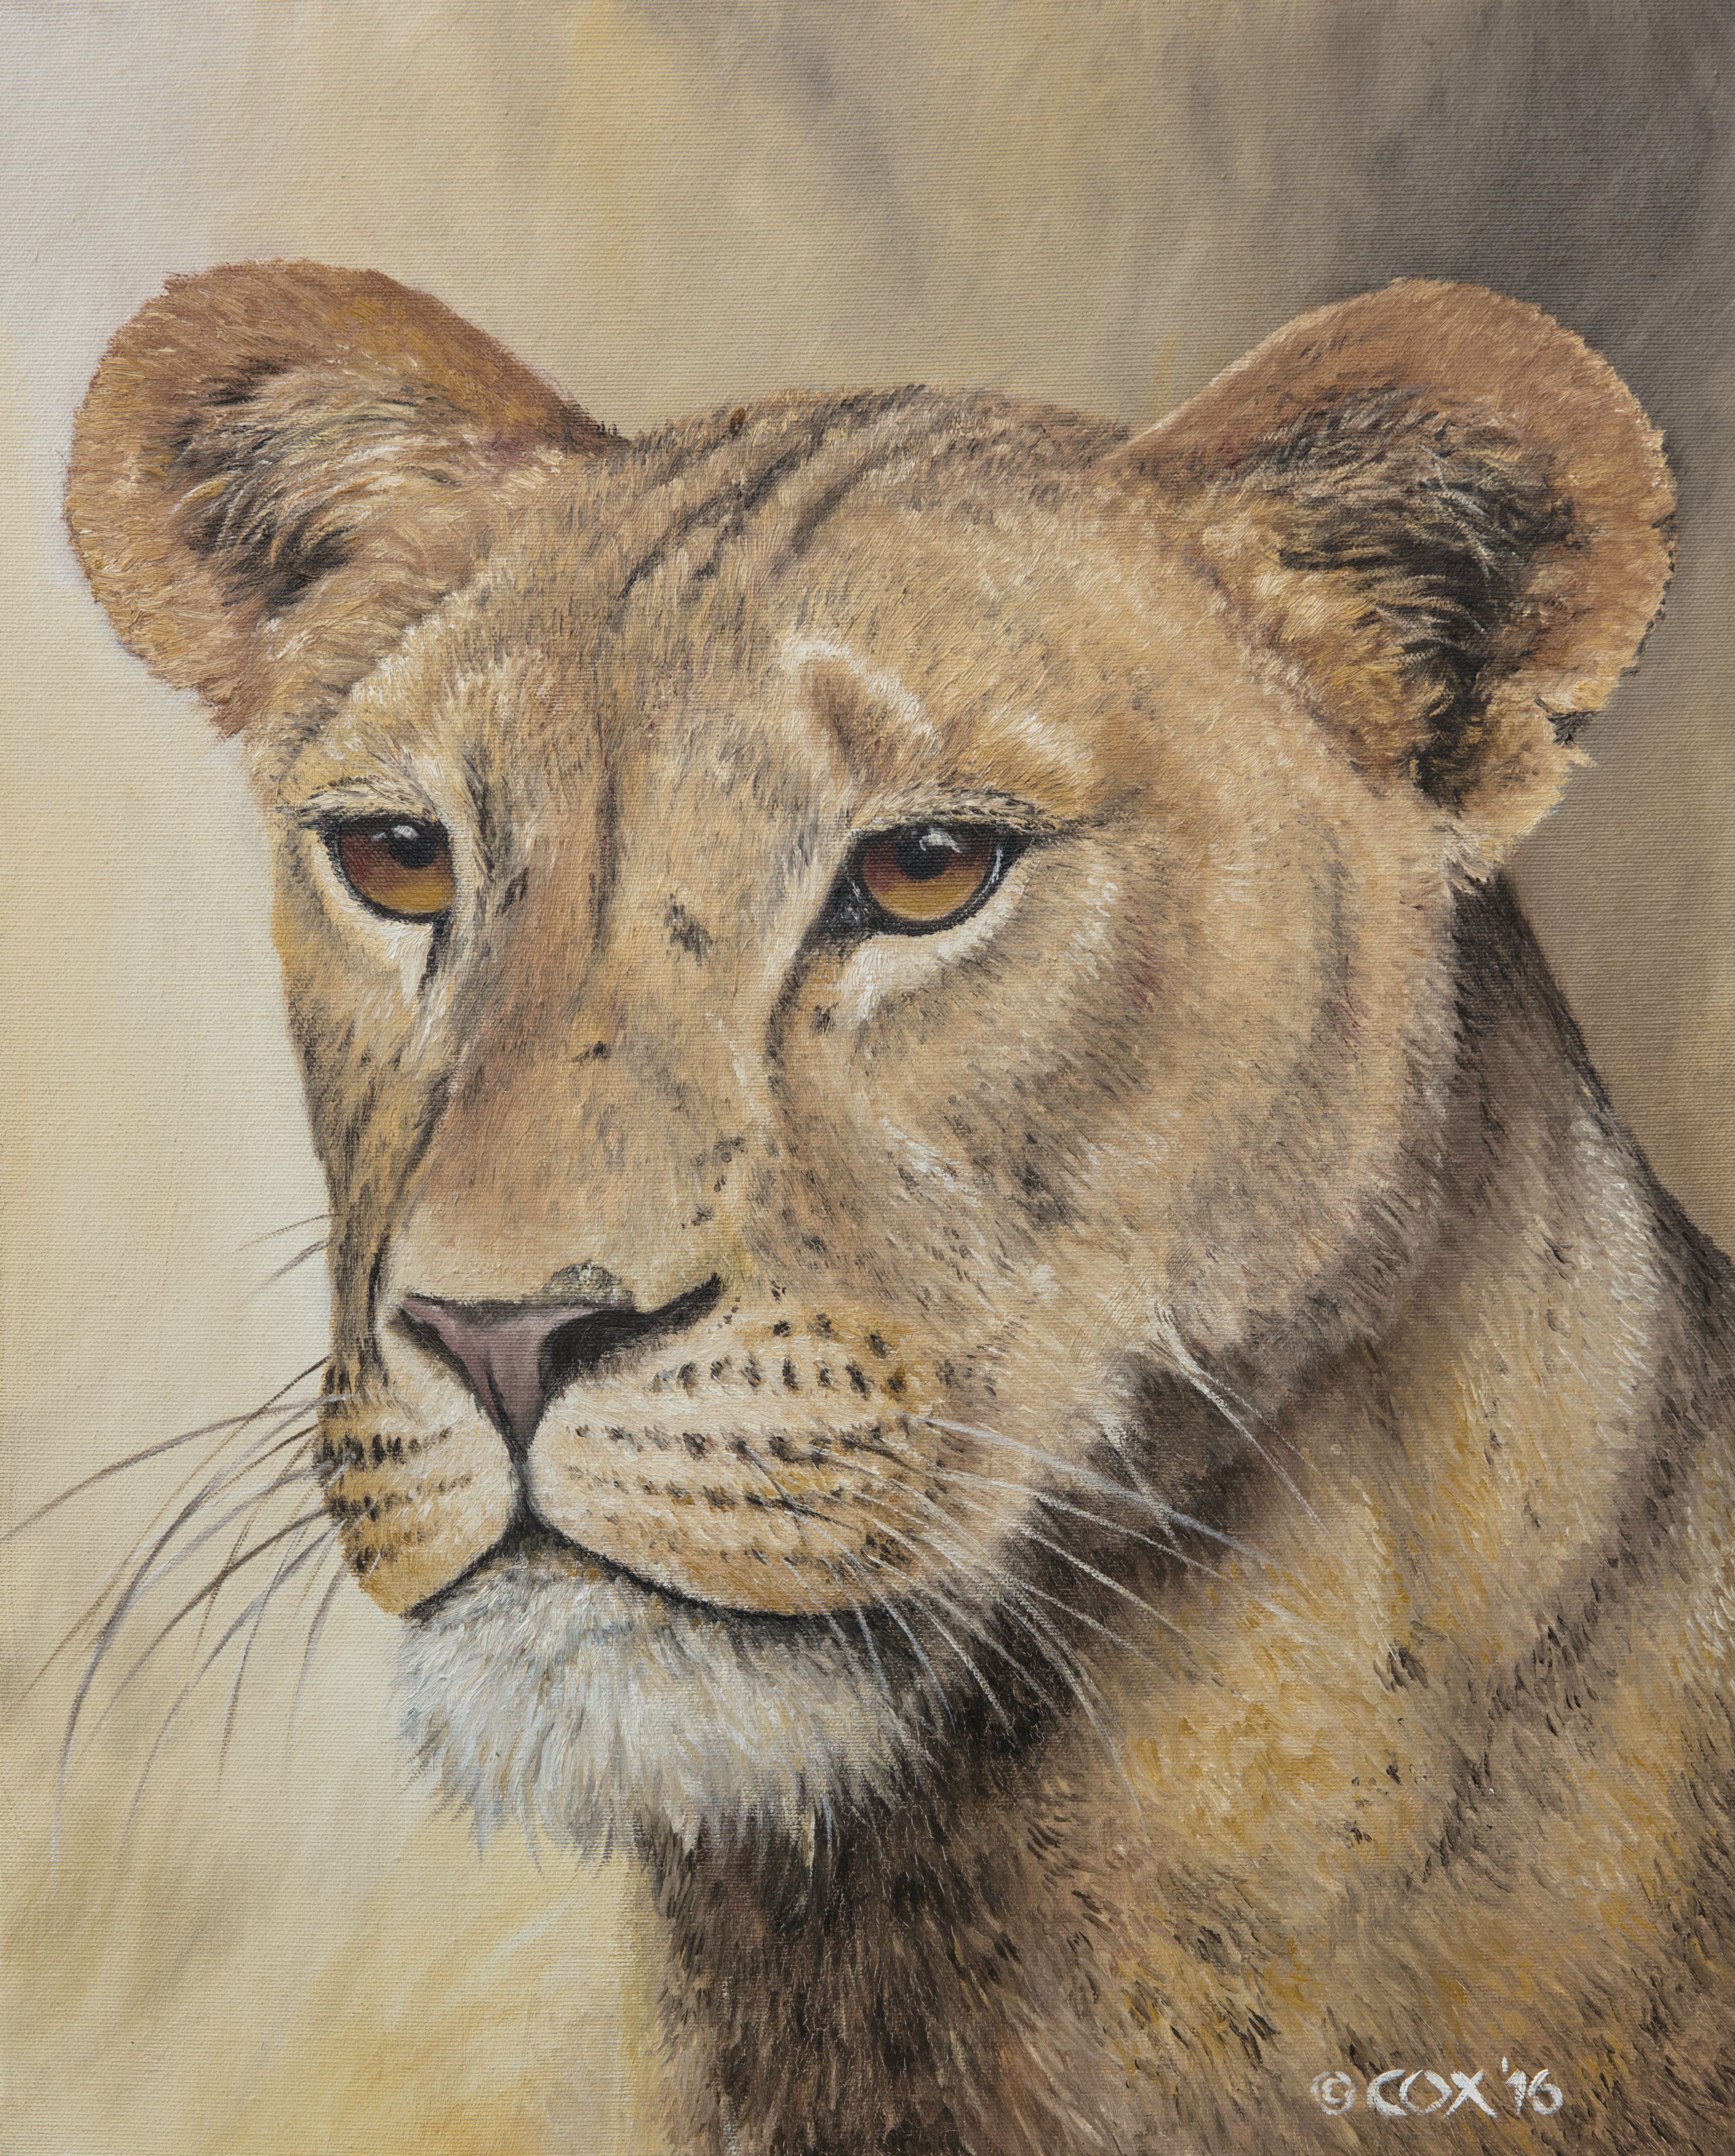 'On guard' Lioness, Oil on canvas, 20x16"